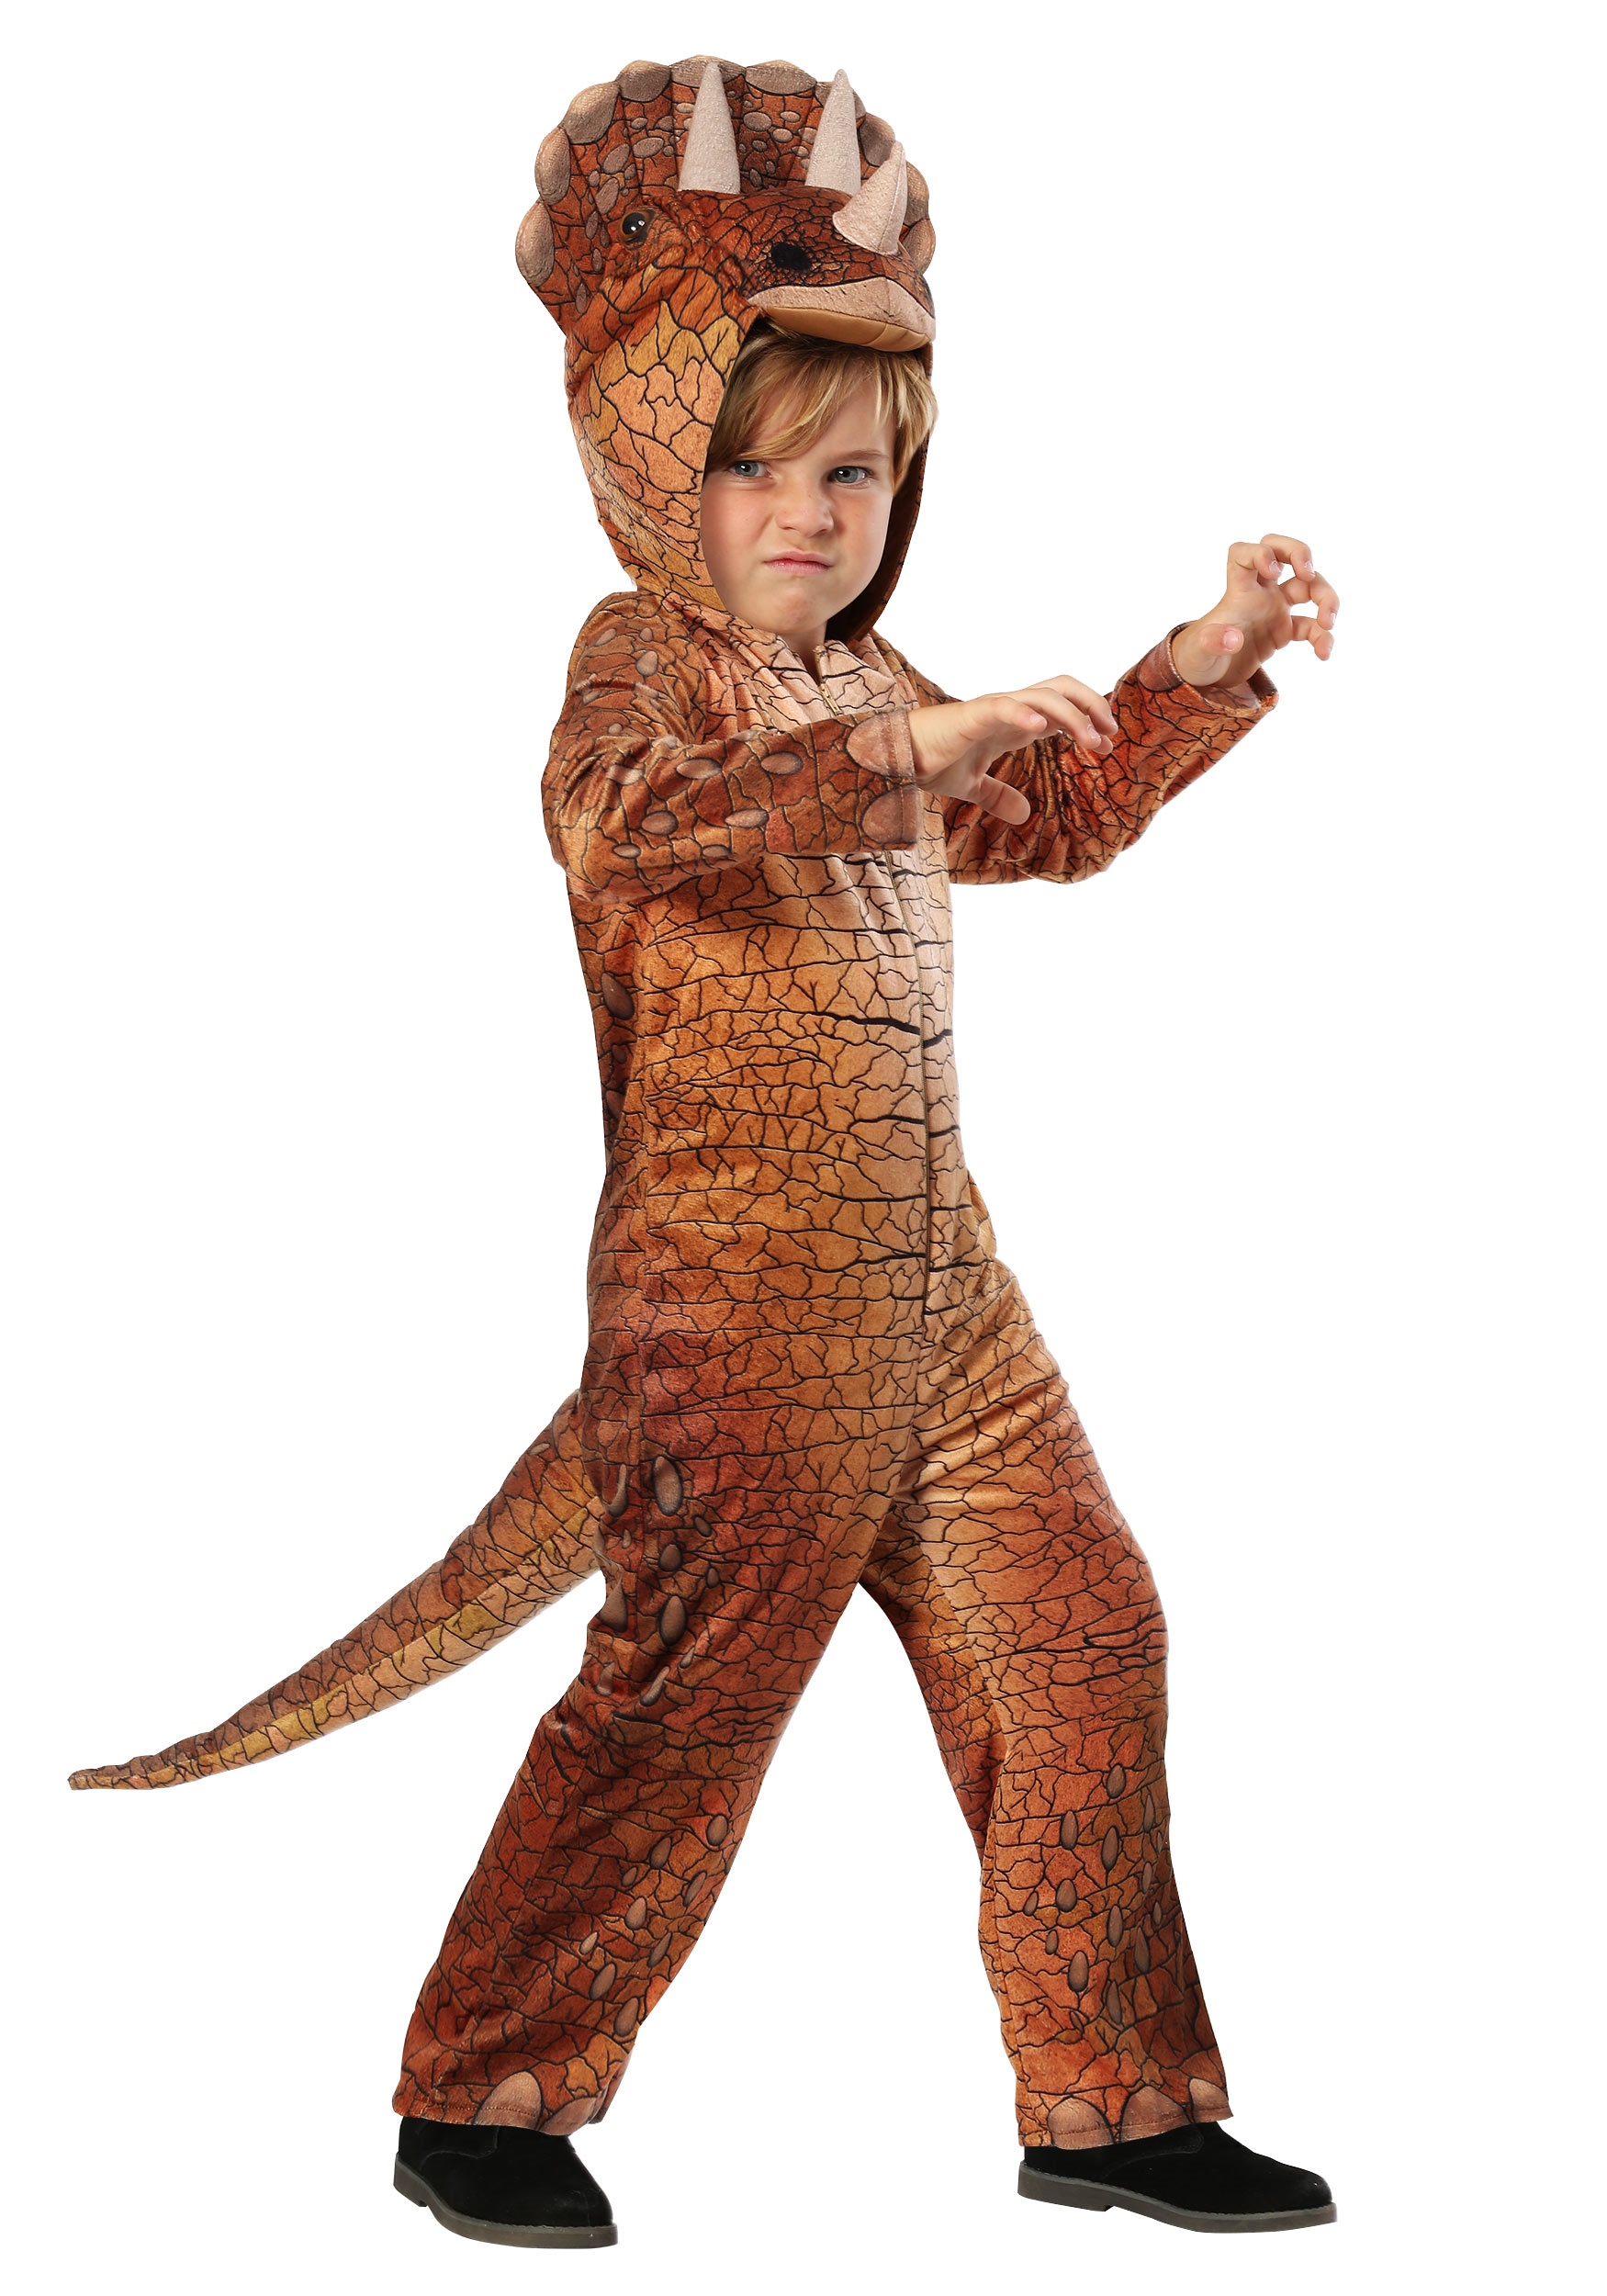 Photos - Fancy Dress FUN Costumes Triceratops Costume for Kids | Exclusive | Made By Us Orange